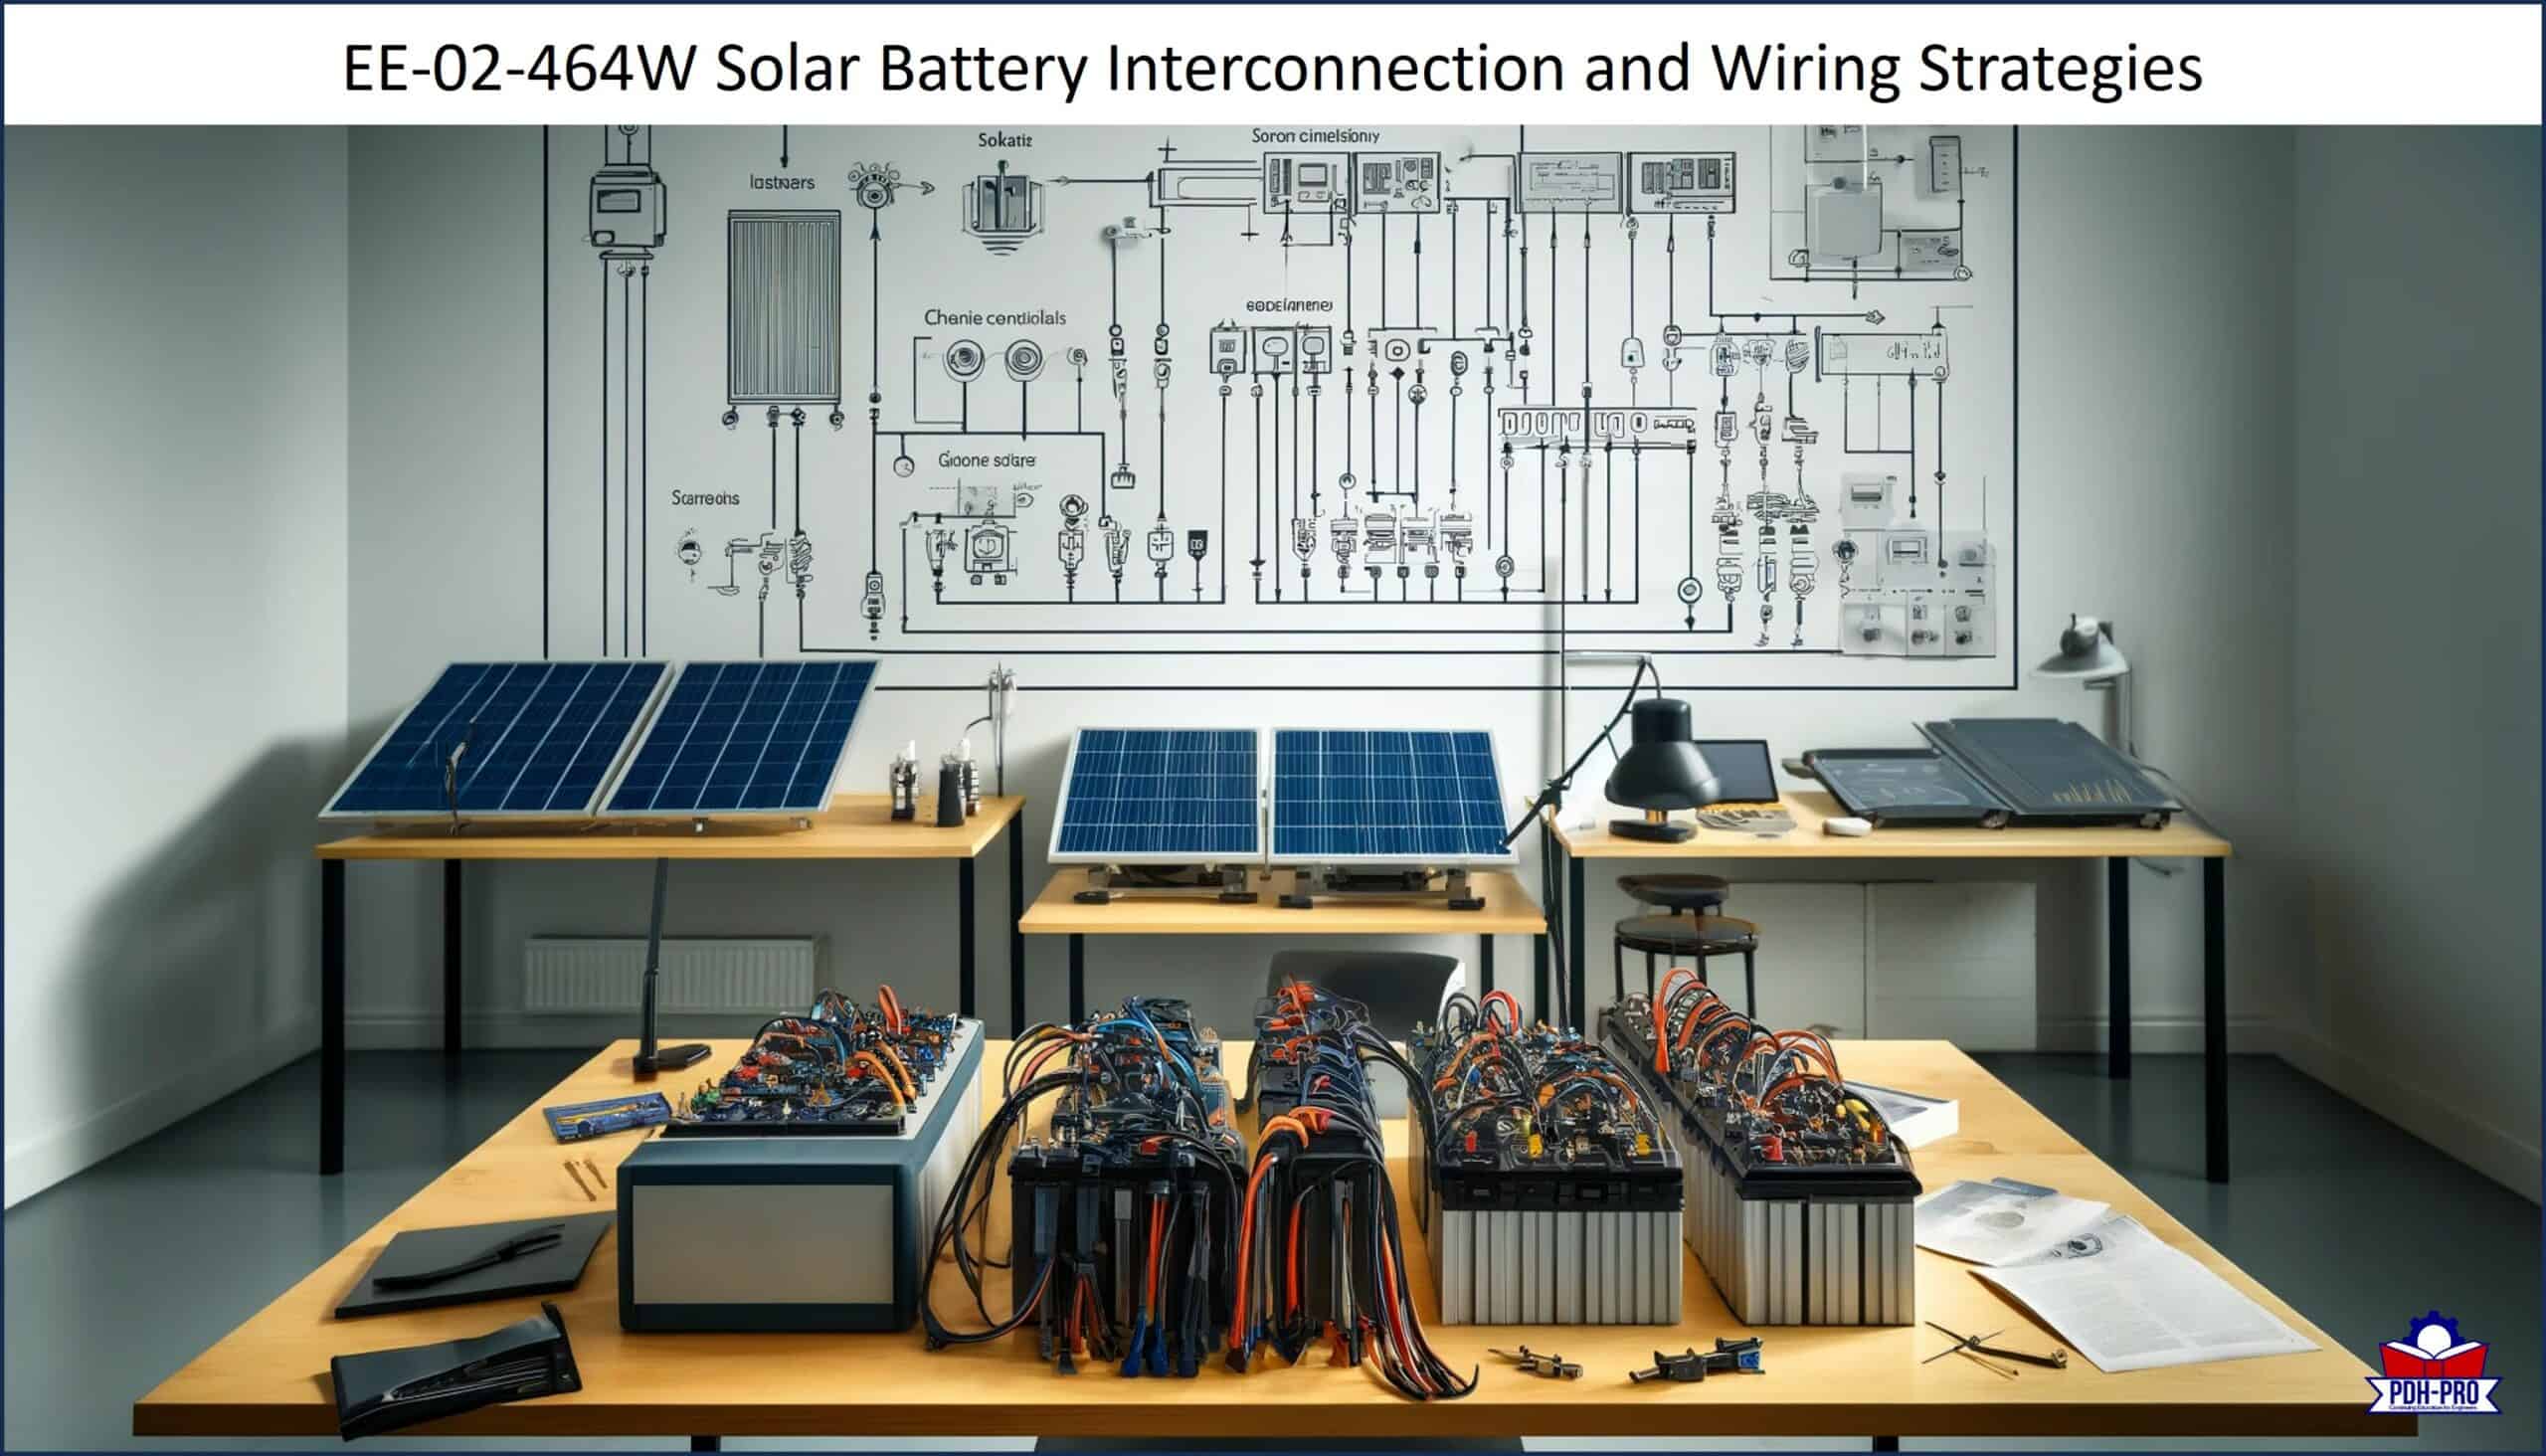 Solar Battery Interconnection and Wiring Strategies